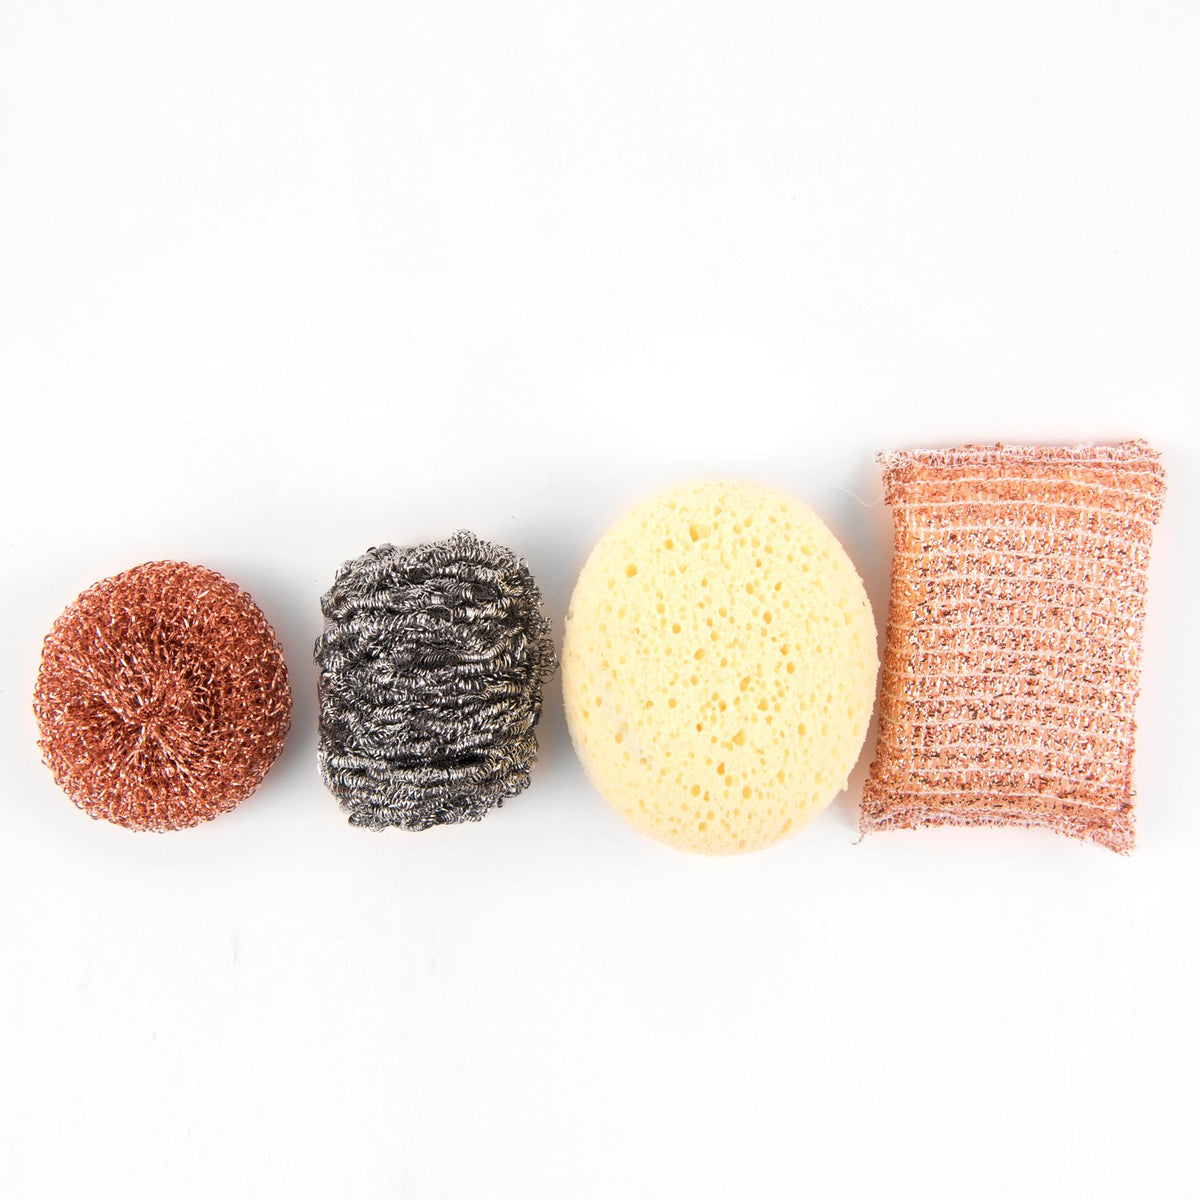 Four different types of Andrée Jardin Tradition Stainless Steel Scrubbers in a row on a white background, including a metallic one and three textured sponges in red, black, and yellow.